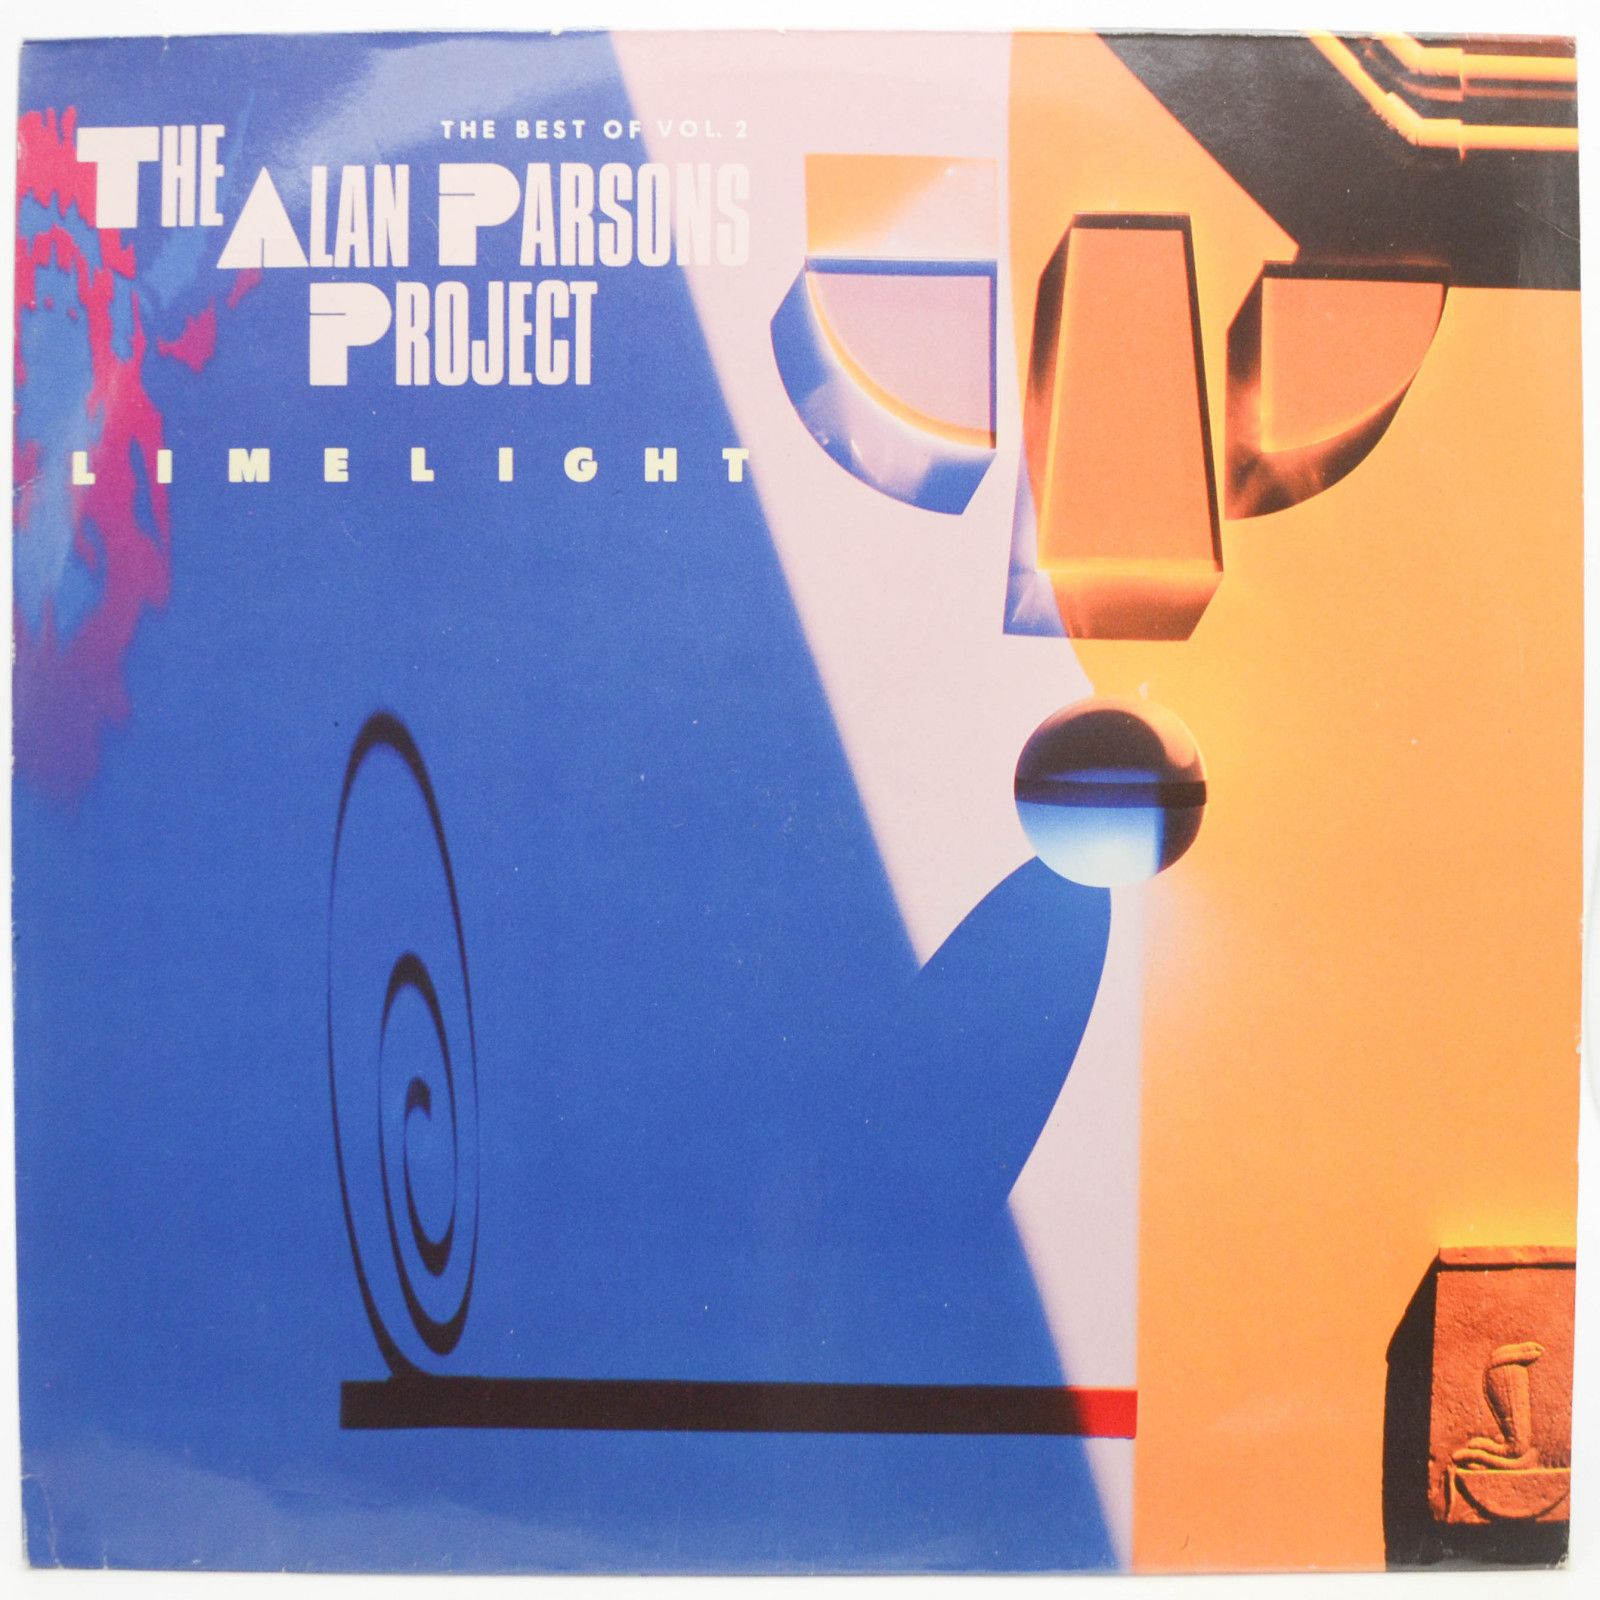 Alan Parsons Project — Limelight - The Best Of Vol.2, 1987